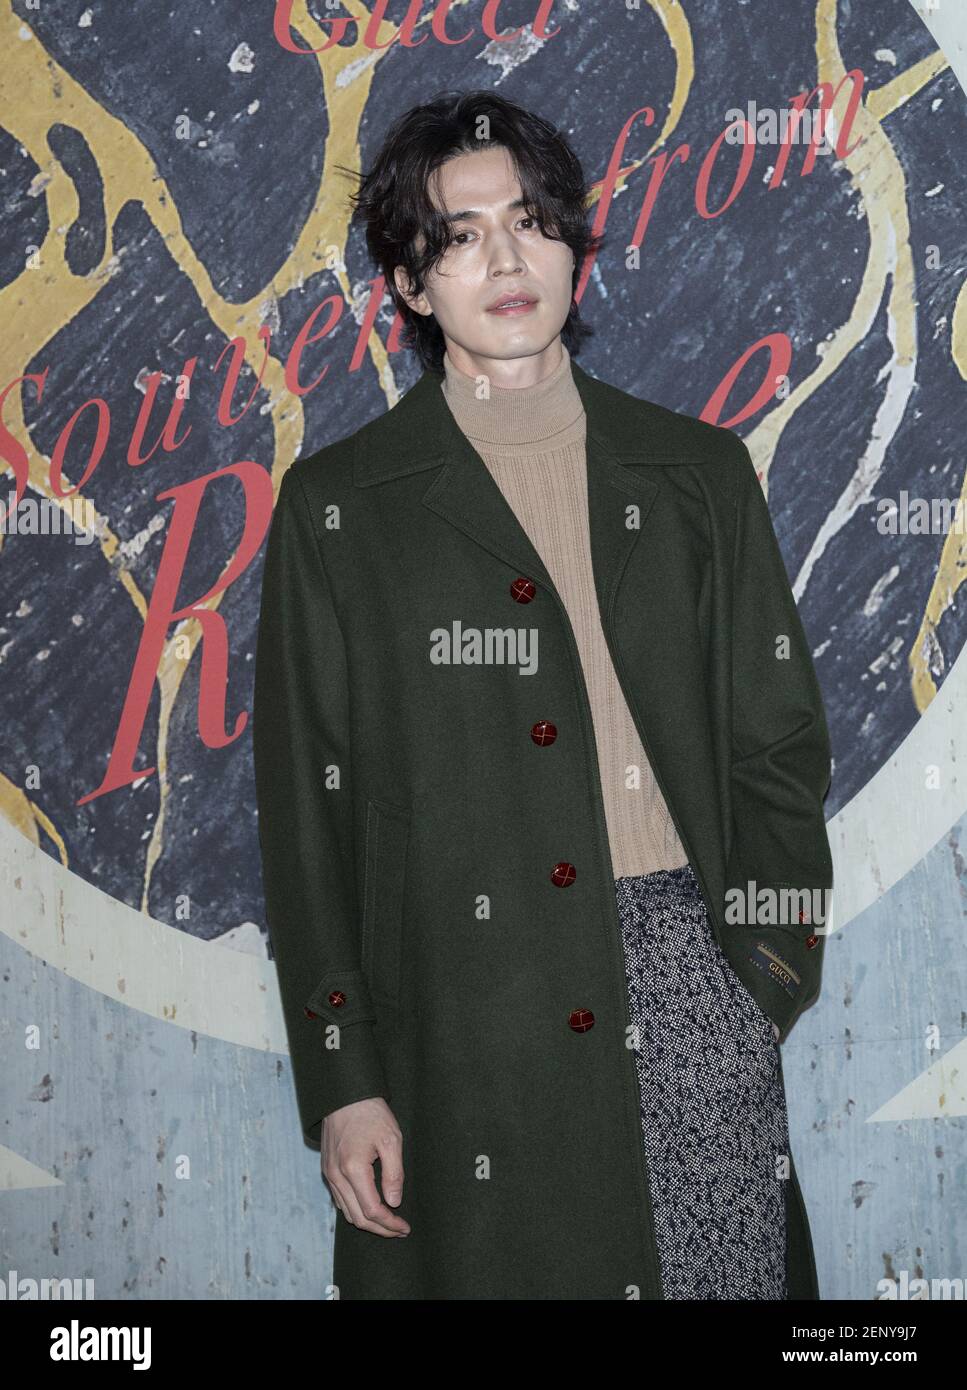 1 October 2019 - Seoul, South Korea : South Korean actor Lee Dong-wook,  attend a photocall for the fashion brand Gucci Cruse Collection Party in  Seoul, South Korea on October 1, 2019. (